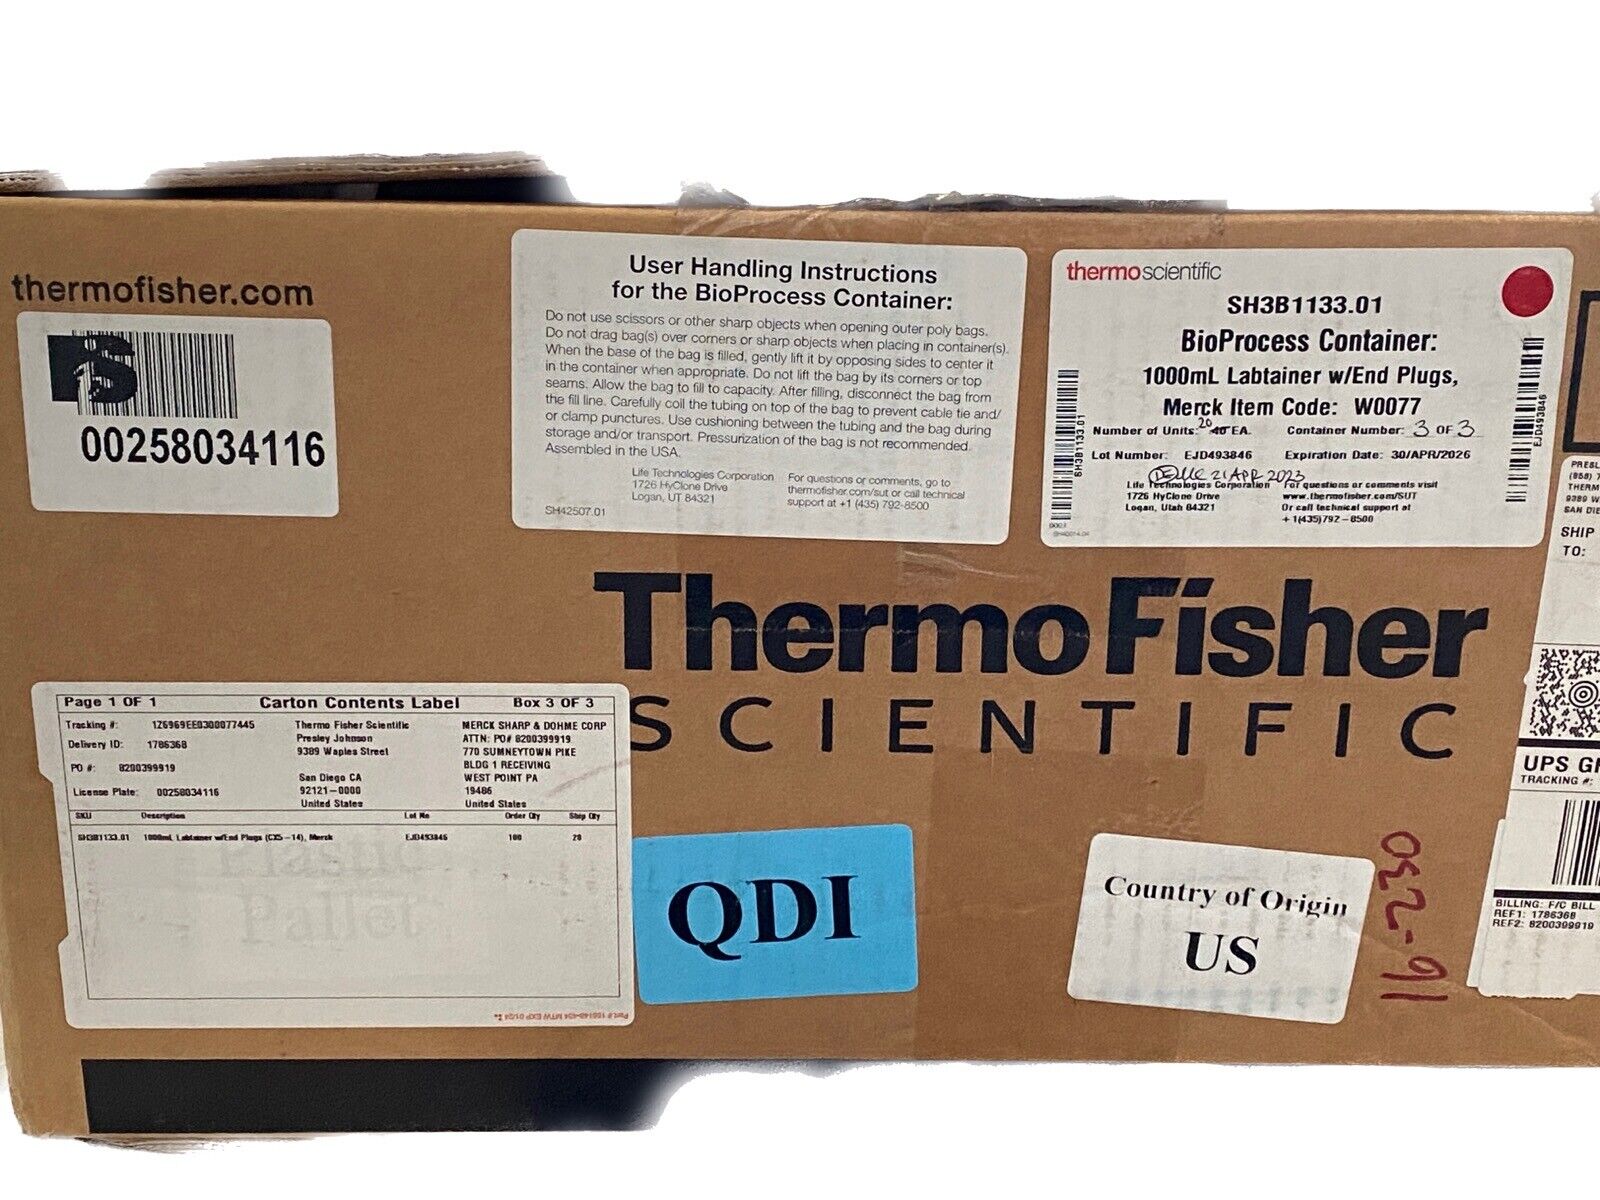 (20) THERMO FISHER 1000mL BioProcess Labtainer w/ End Plugs SH3B1133.01